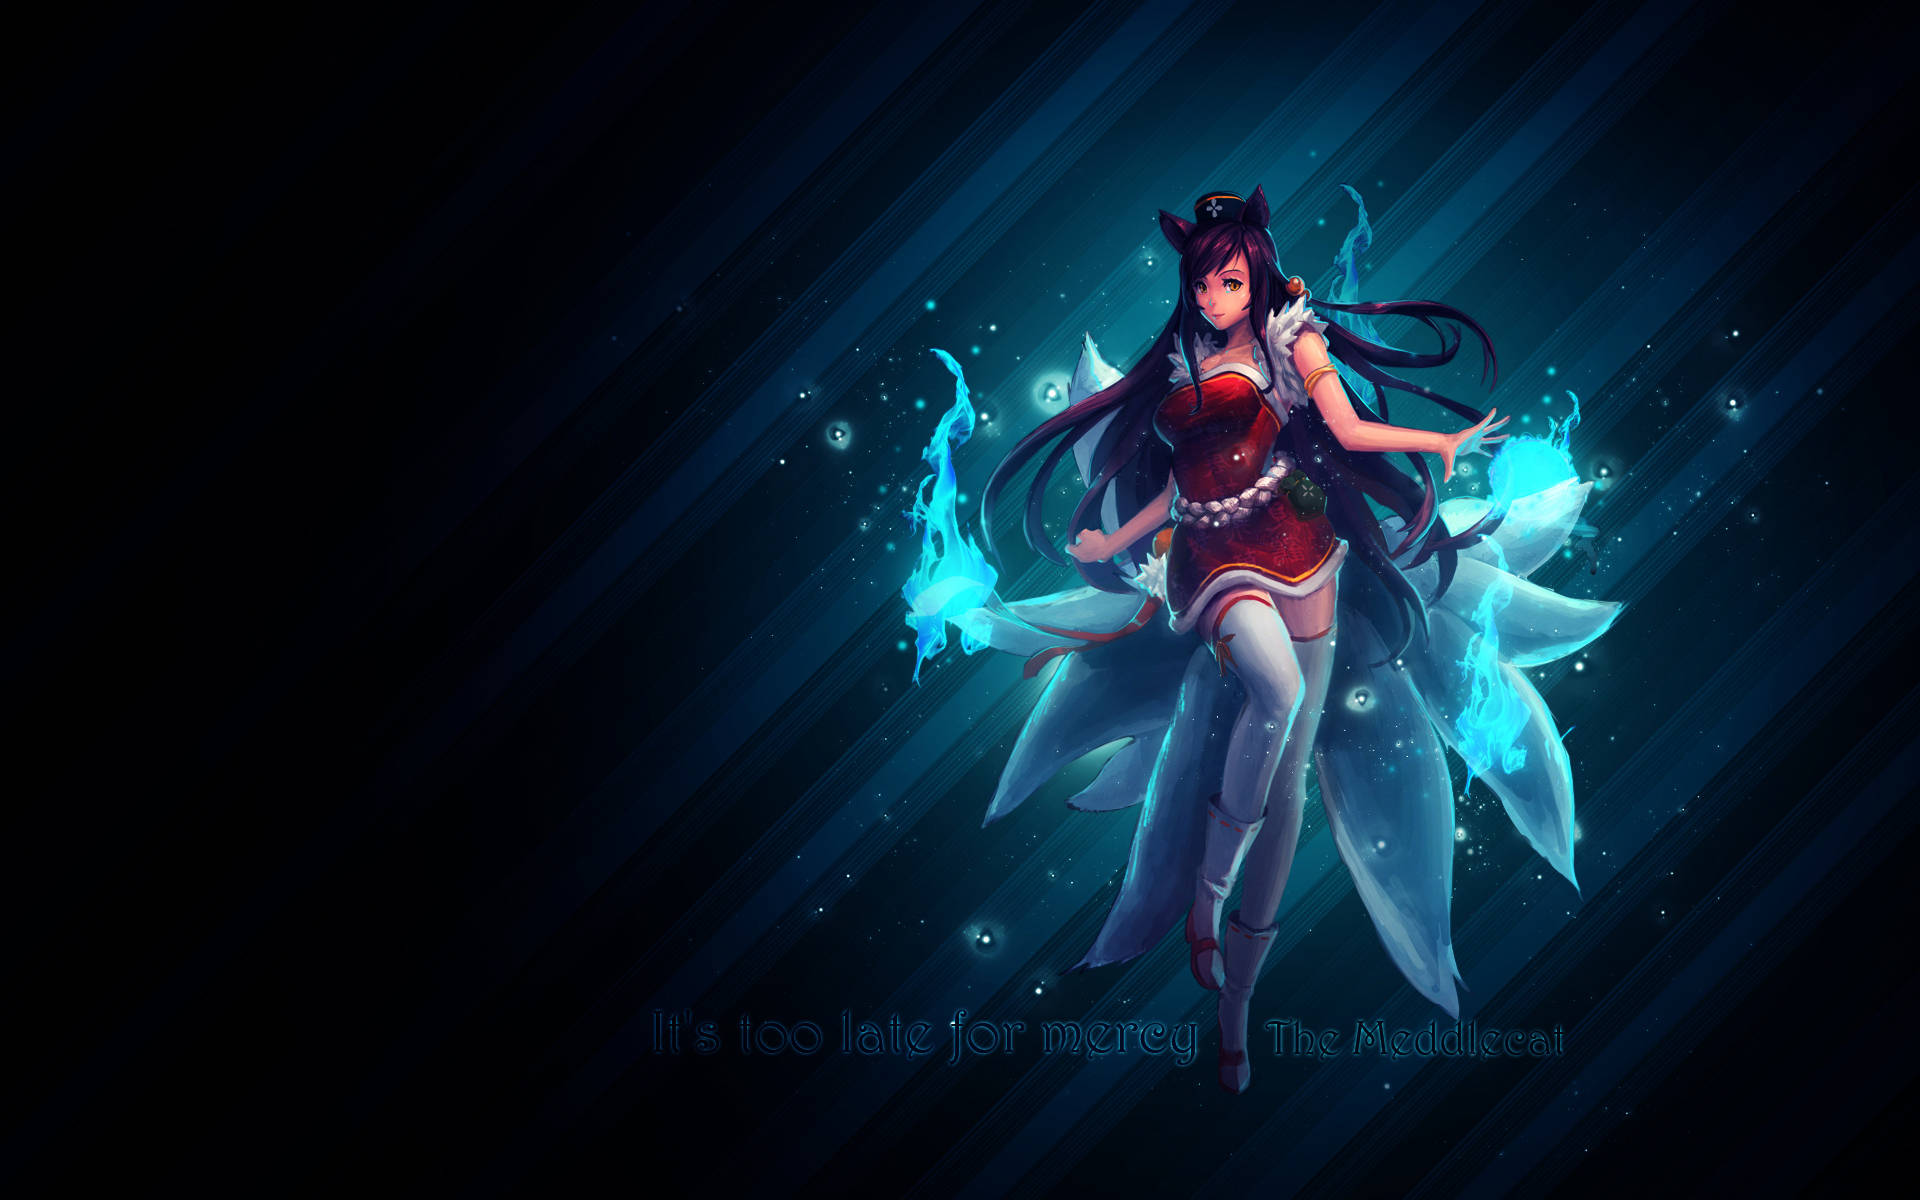 Three-dimensional League Of Legends characters ready for battle Wallpaper